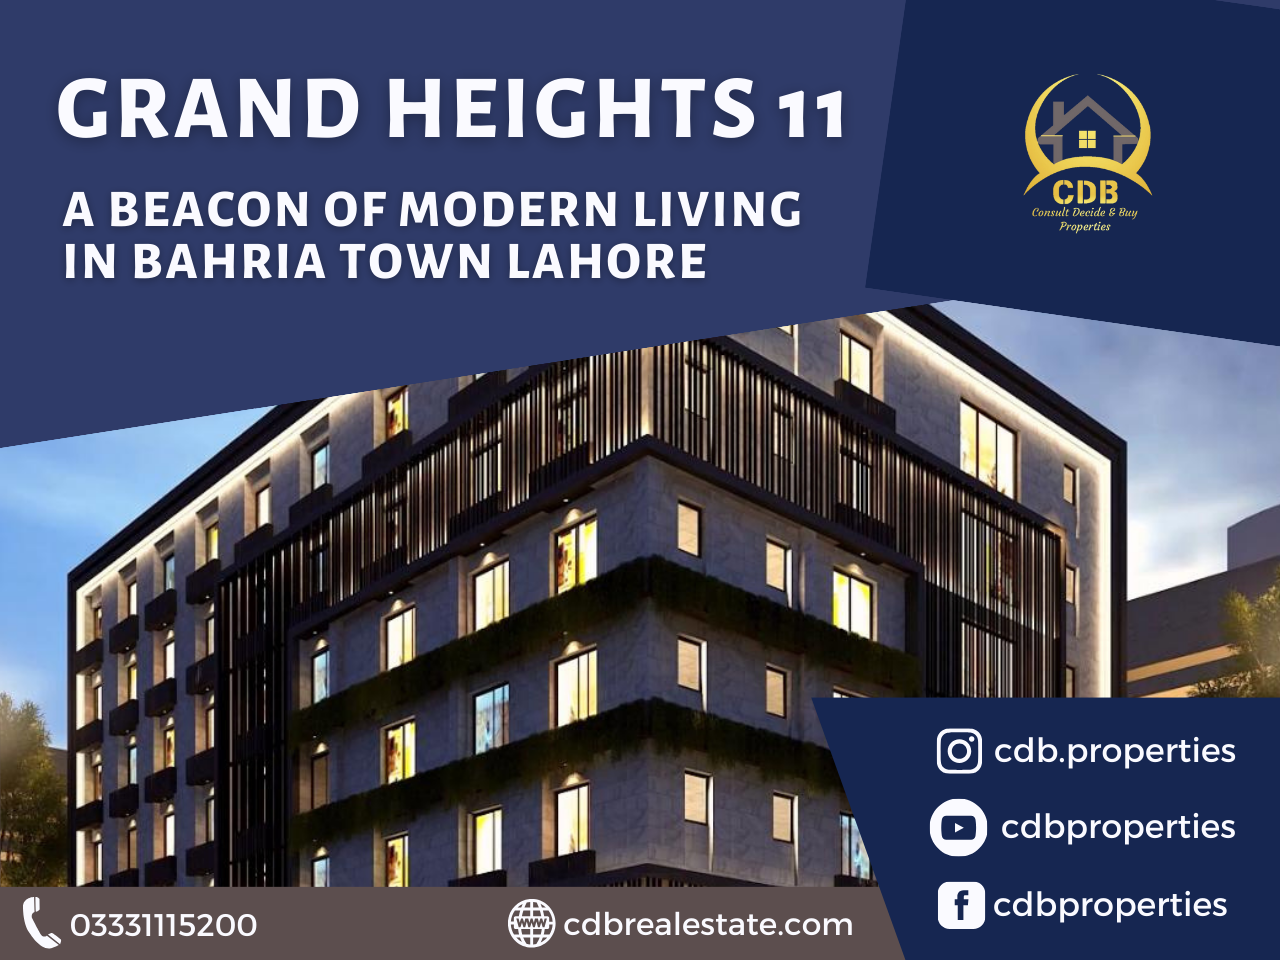 Grand Heights 11: A Beacon of Modern Living in Bahria Town Lahore